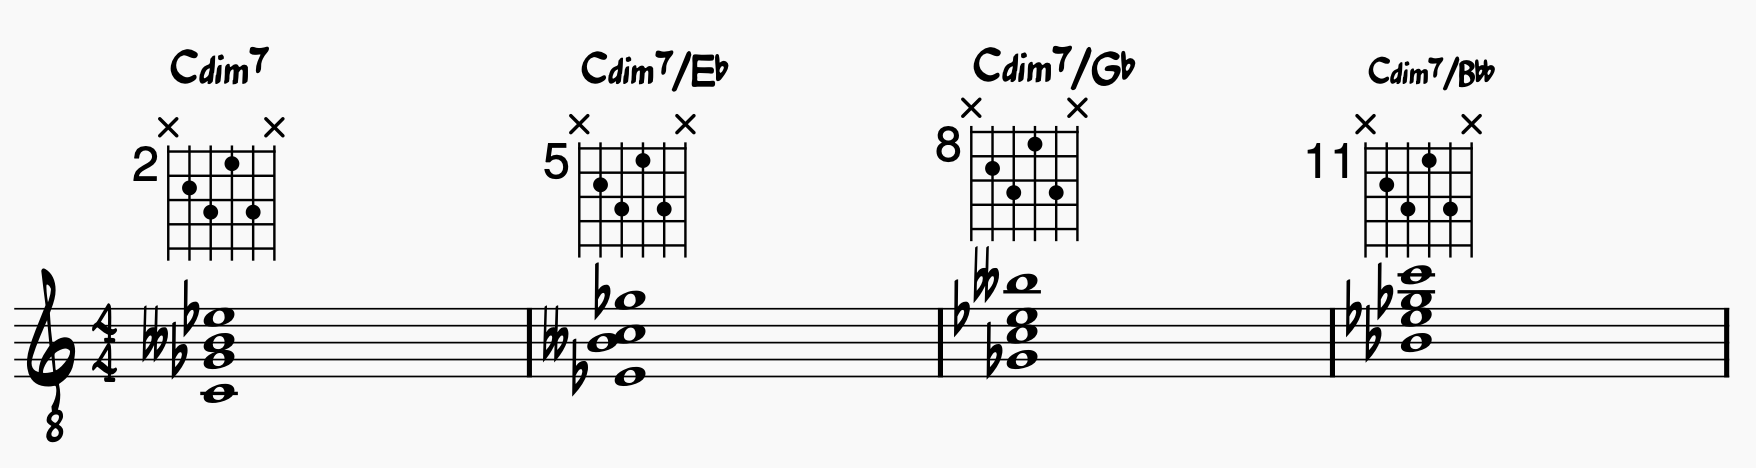 Dim Chord: C dim chord in root position and all inversions on the ADGB string group with chord chart